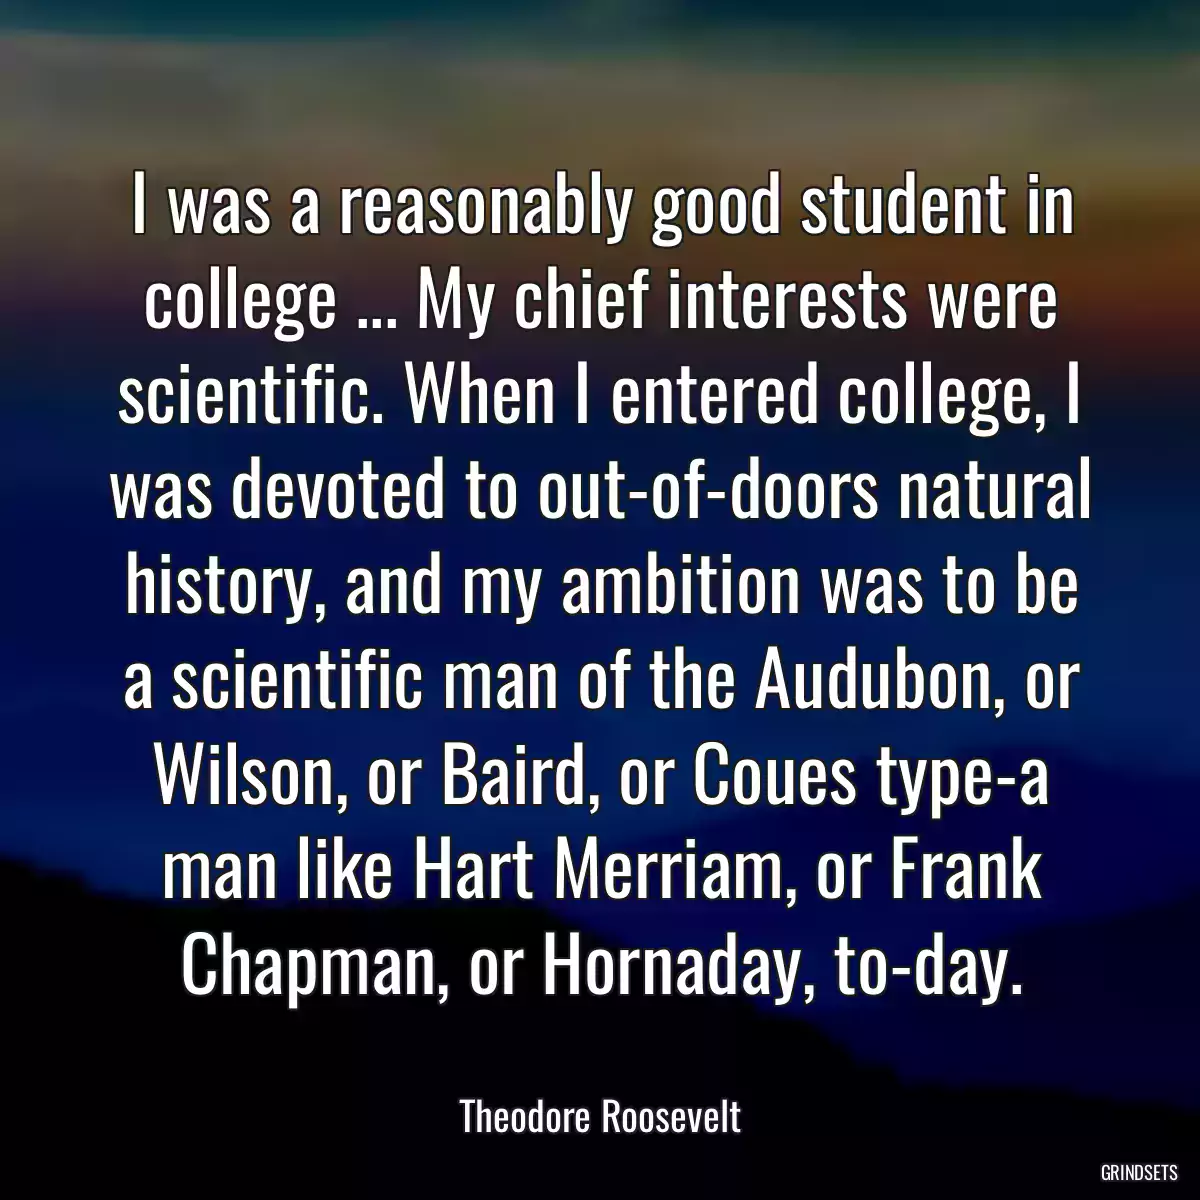 I was a reasonably good student in college ... My chief interests were scientific. When I entered college, I was devoted to out-of-doors natural history, and my ambition was to be a scientific man of the Audubon, or Wilson, or Baird, or Coues type-a man like Hart Merriam, or Frank Chapman, or Hornaday, to-day.